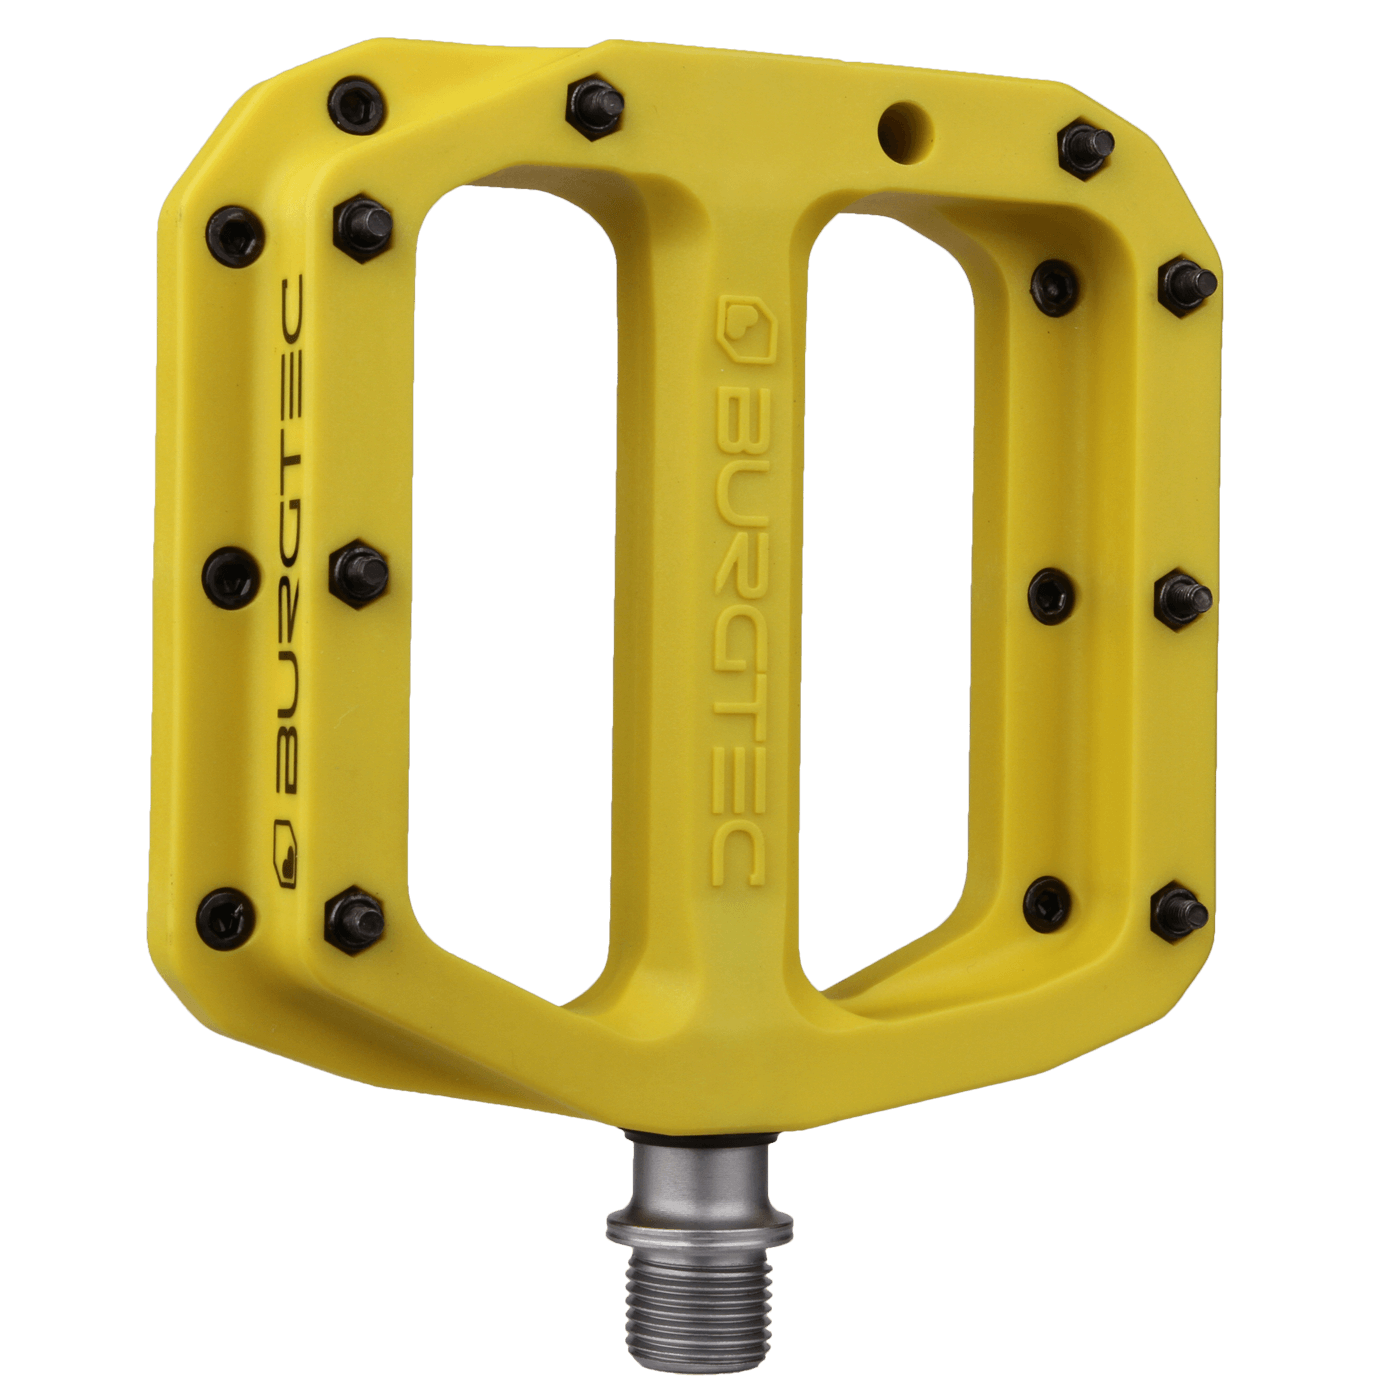 Burgtec composite pedals in Electric Yellow